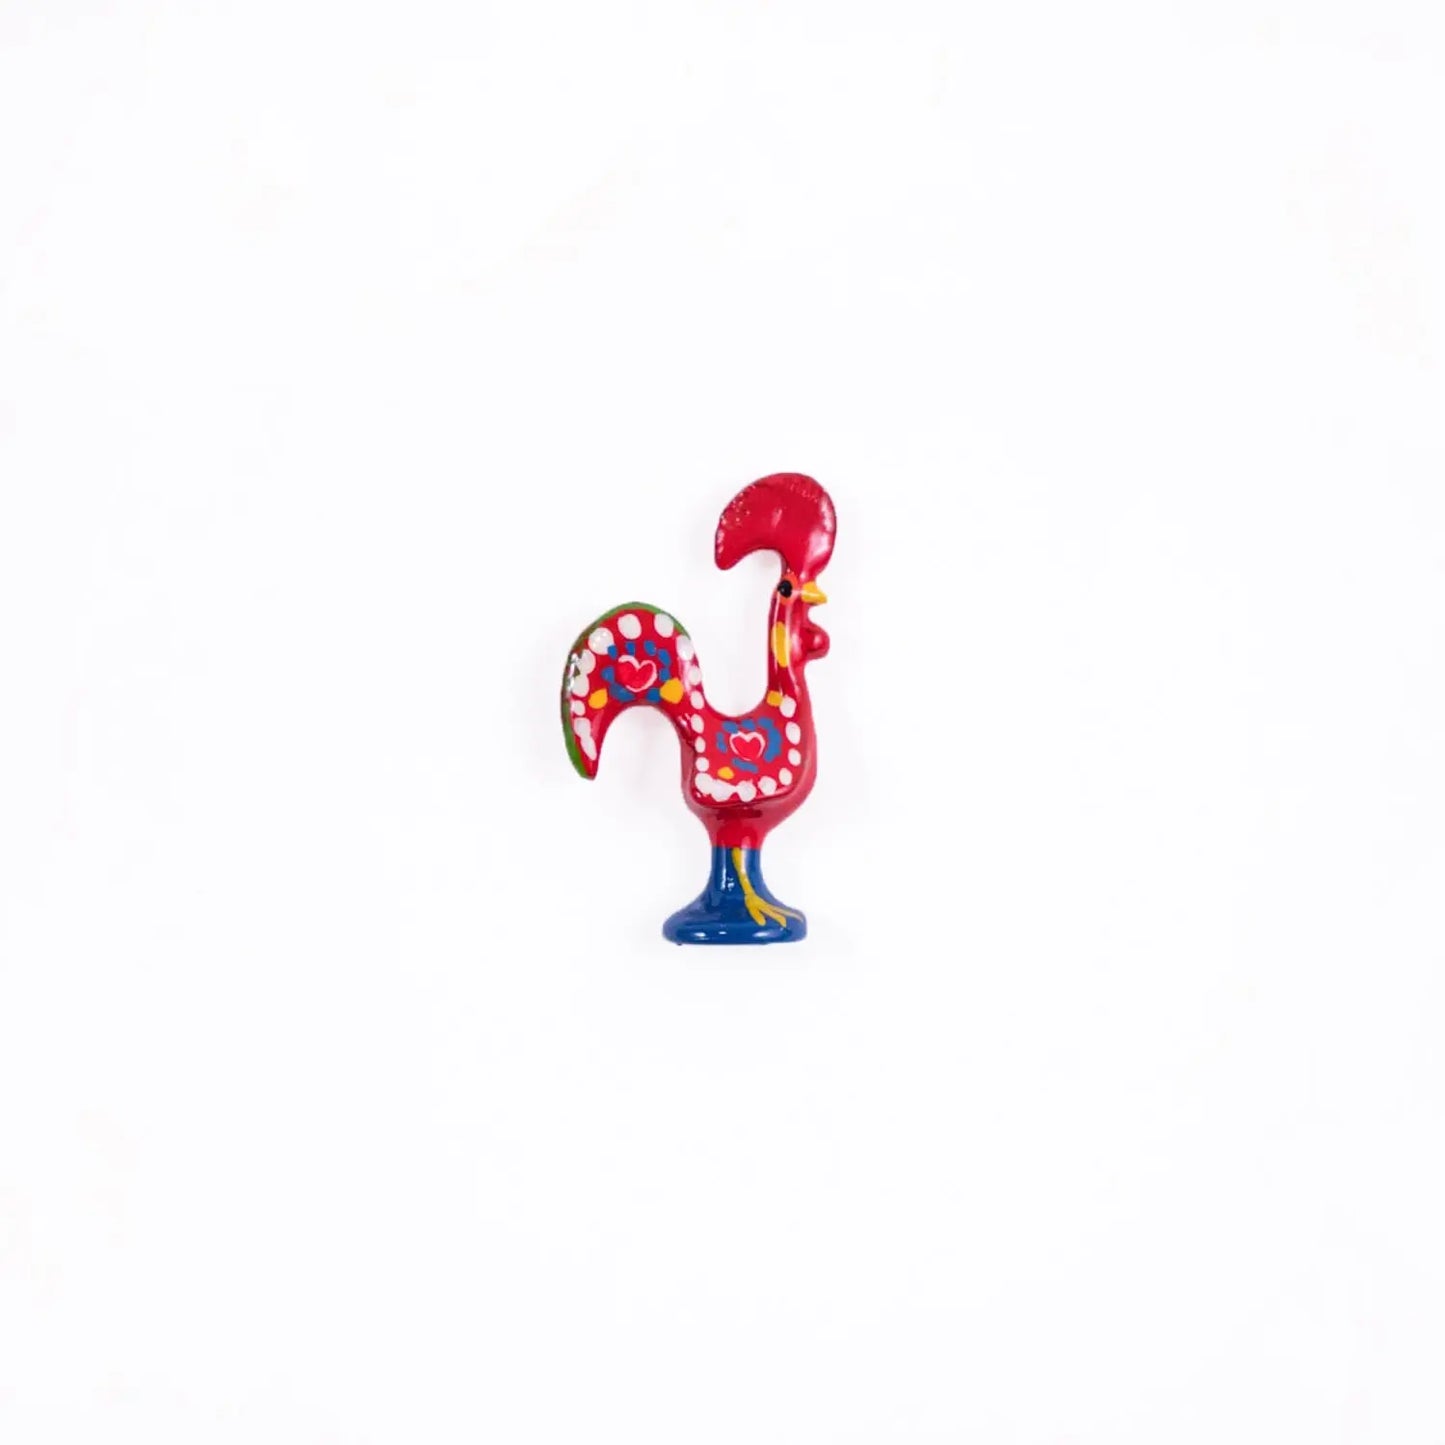 Portuguese Inspired Barcelos Rooster Lapel Pin in Red-Rooster Camisa